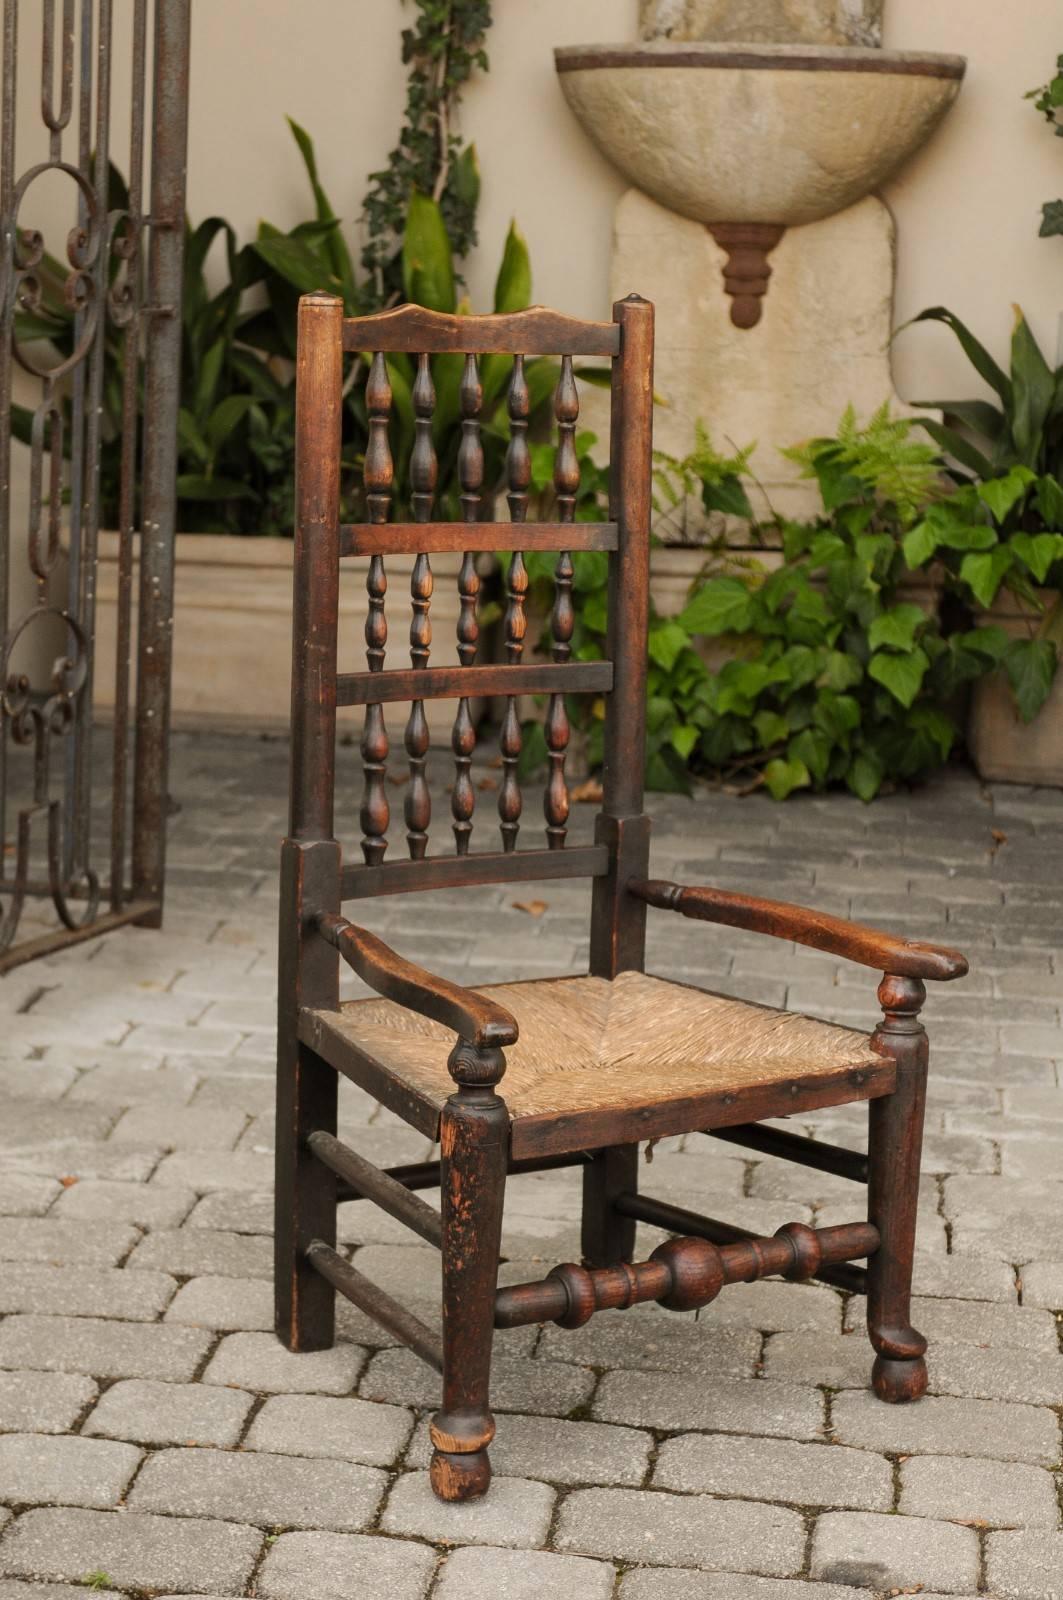 An English William and Mary style oak youth chair from the late 18th century, with rush seat and spindle back. This English oak chair features a straight spindle back, connected to two open arms, adorned with delicately splayed extremities. The